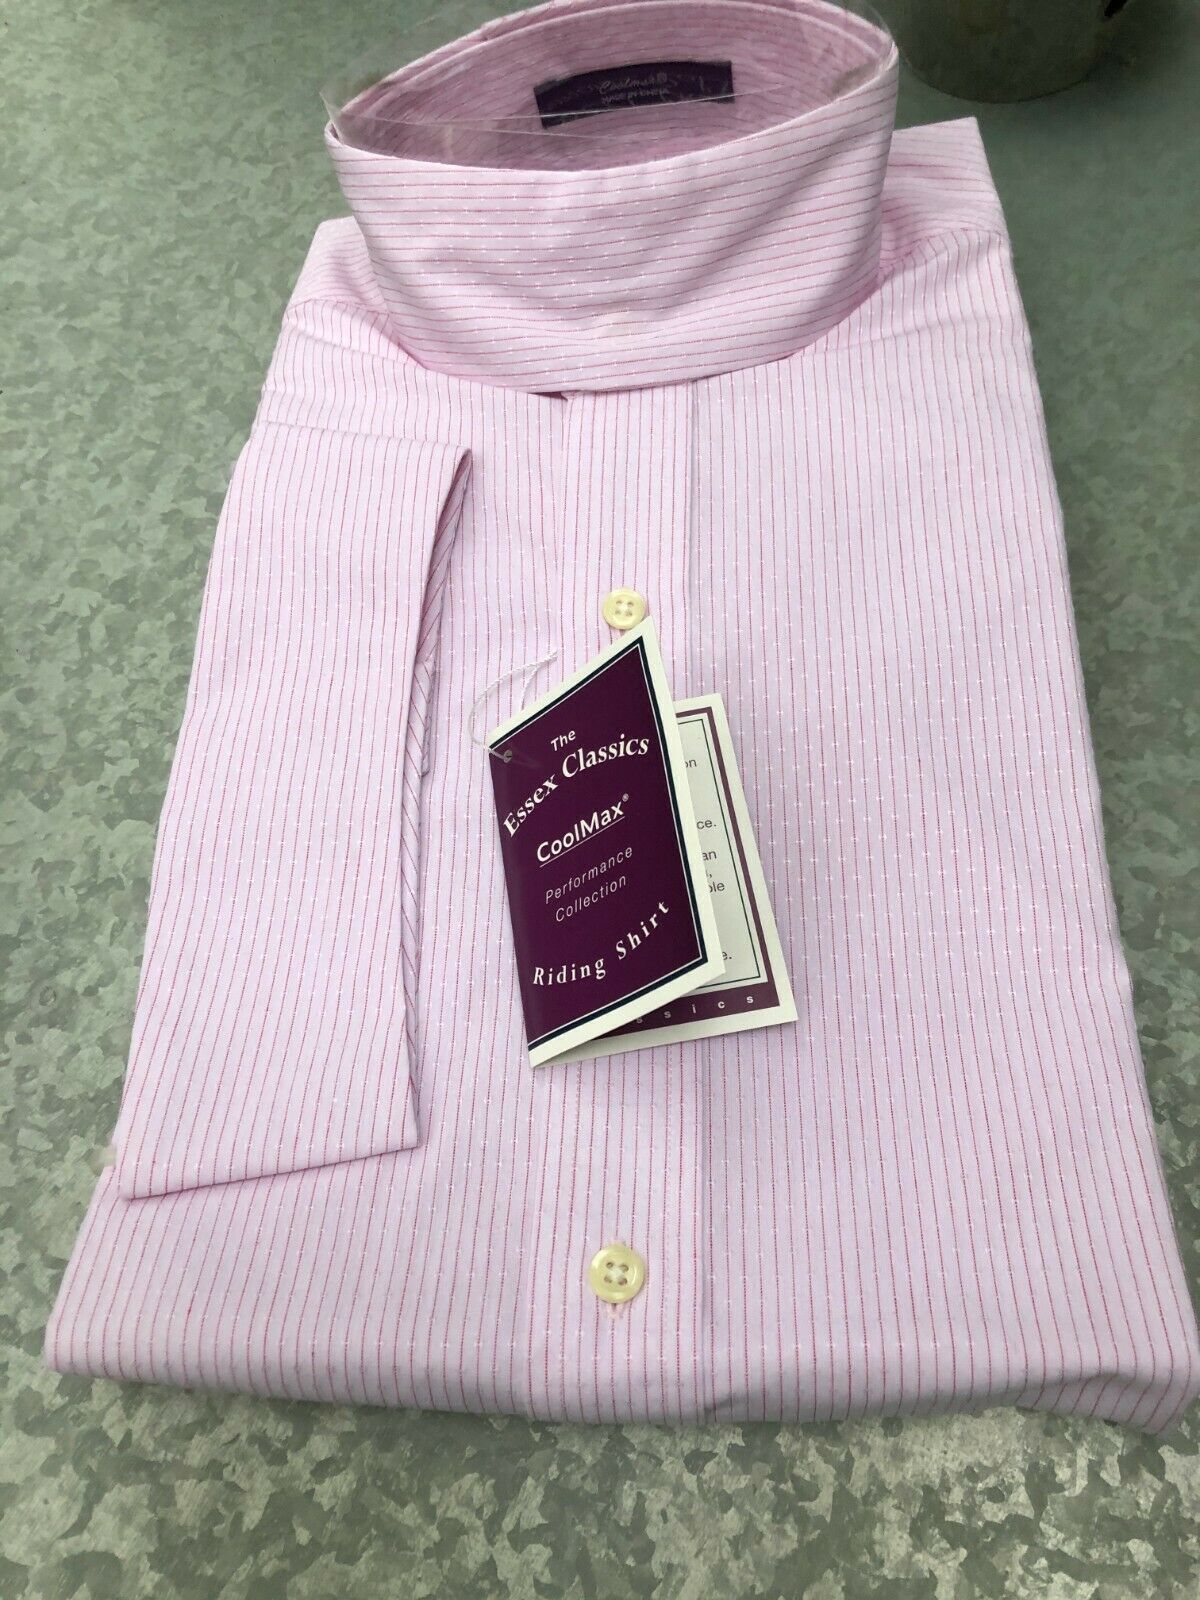 New Child Size 12 - Essex Classic Hunt Shirt - Pink Stripe With Coolmax Fabric